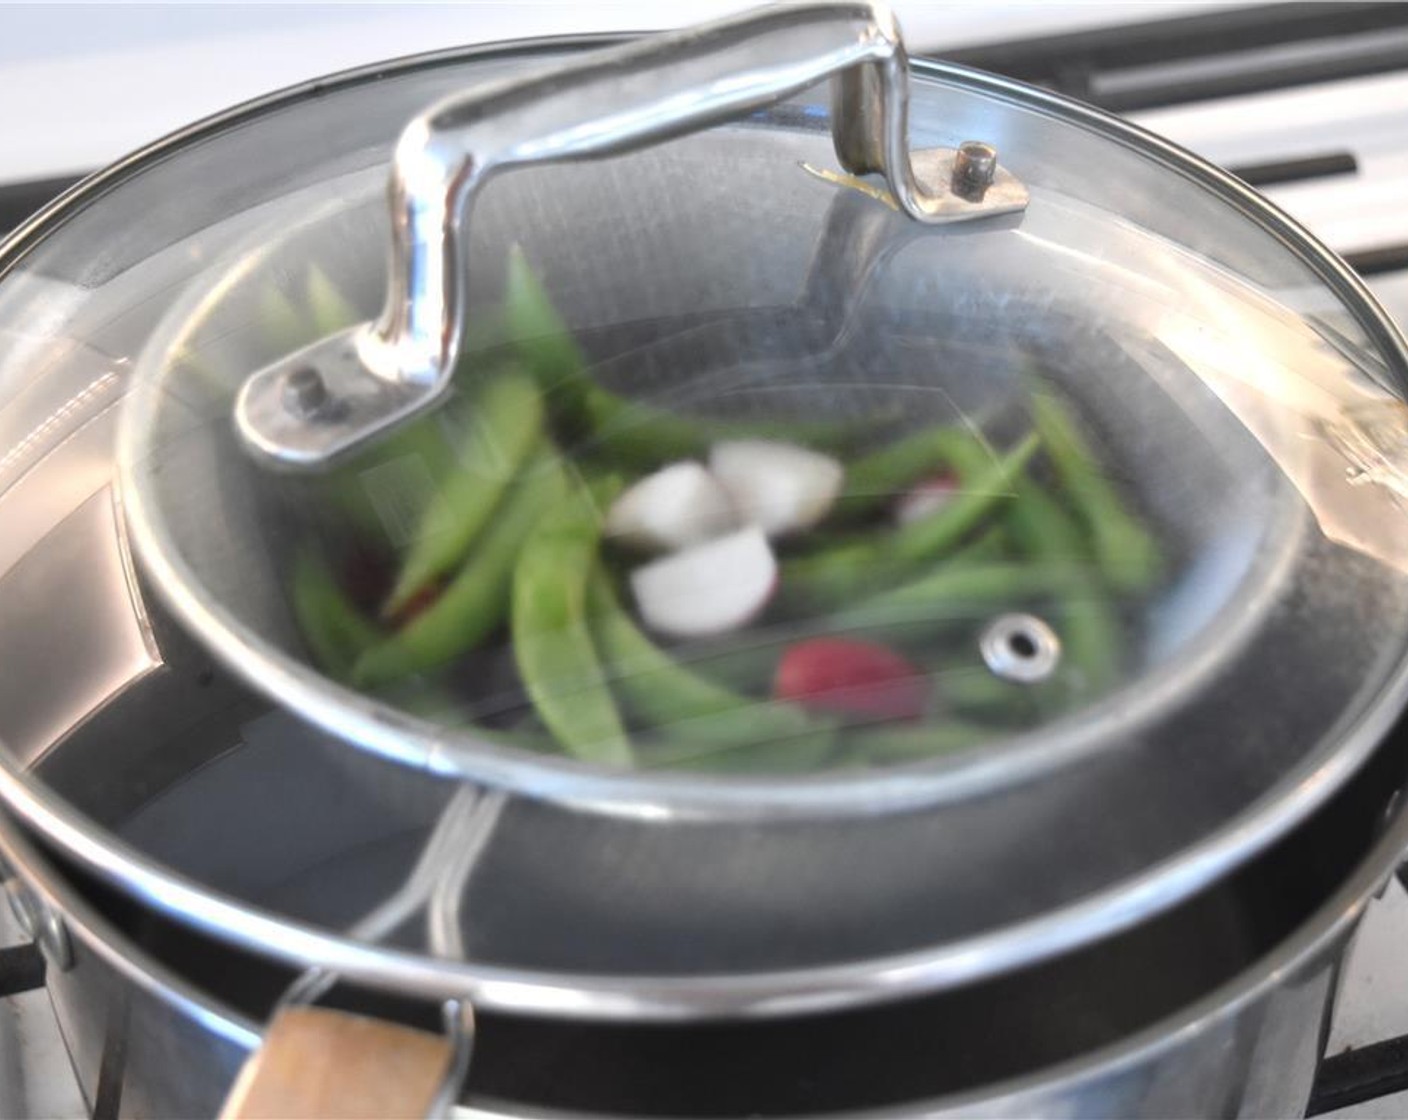 step 4 Use a bamboo steamer if you have one. Steam Sugar Snap Peas (1 1/2 cups) and radishes for 5 minutes. If you do not have a bamboo steamer, you can rig one up with a strainer and large sauce pot. Boil water under the strainer and cover with a lid.